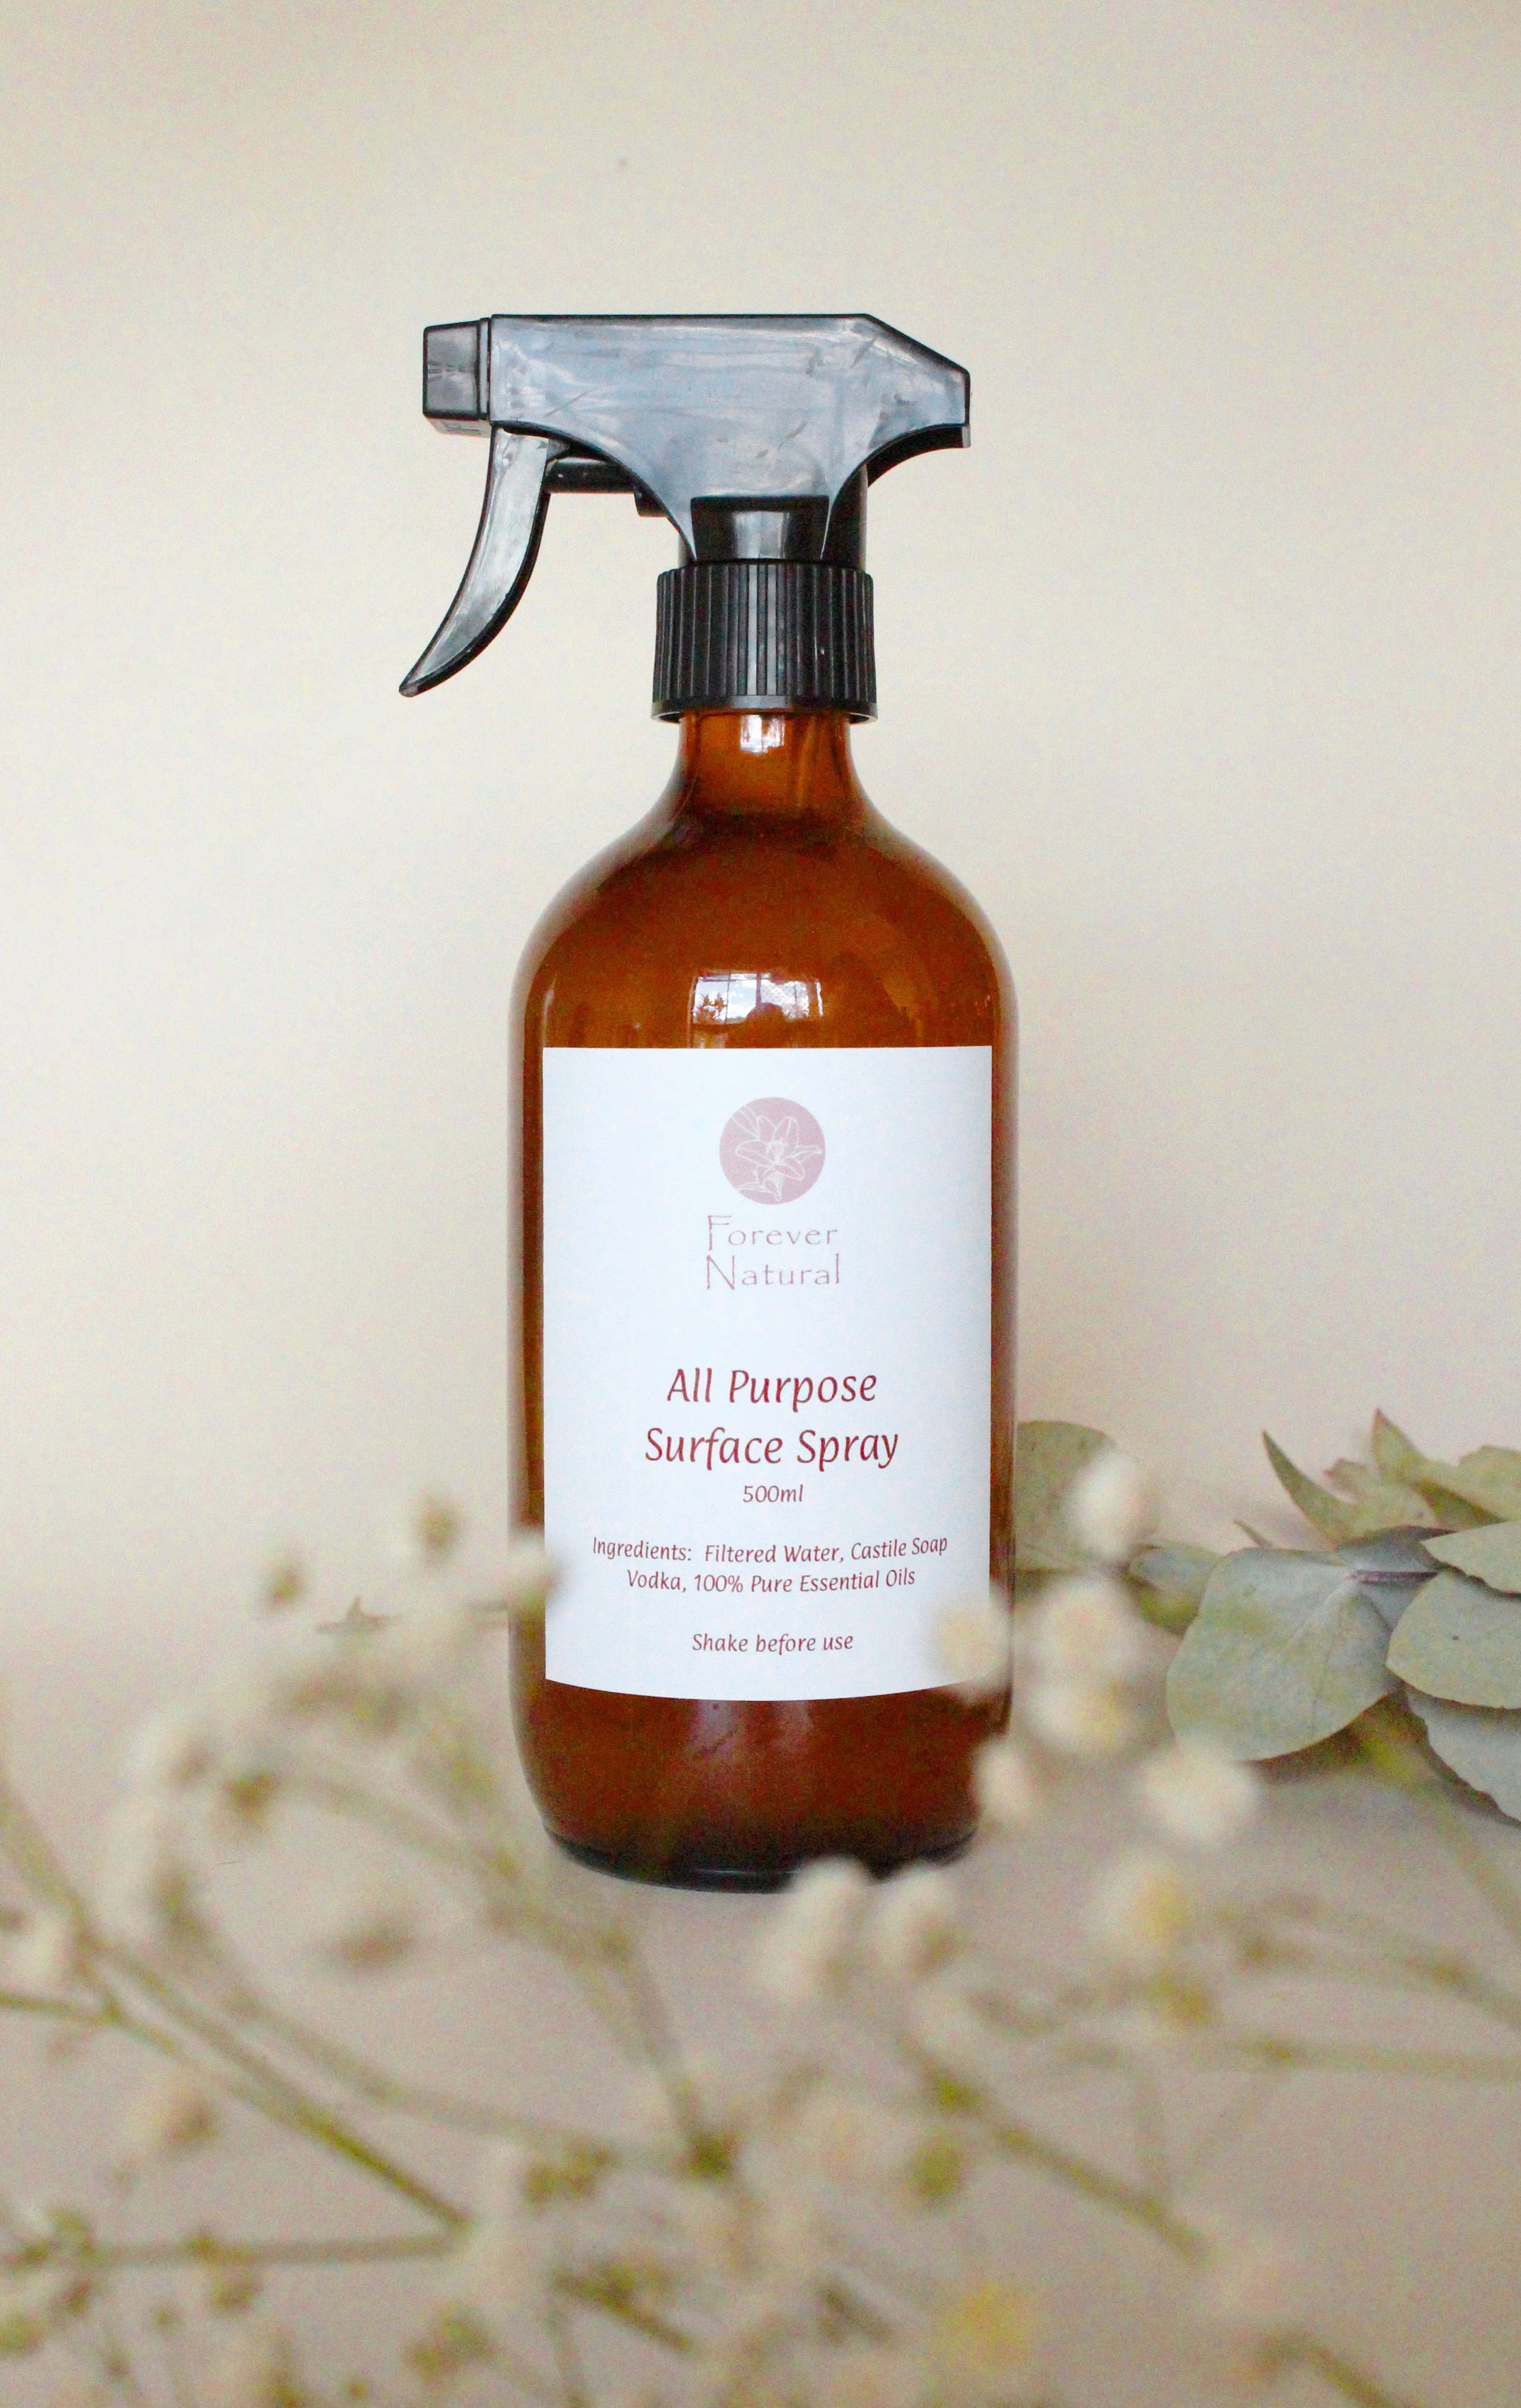 Lovingly made natural body & cleaning products with essential oils